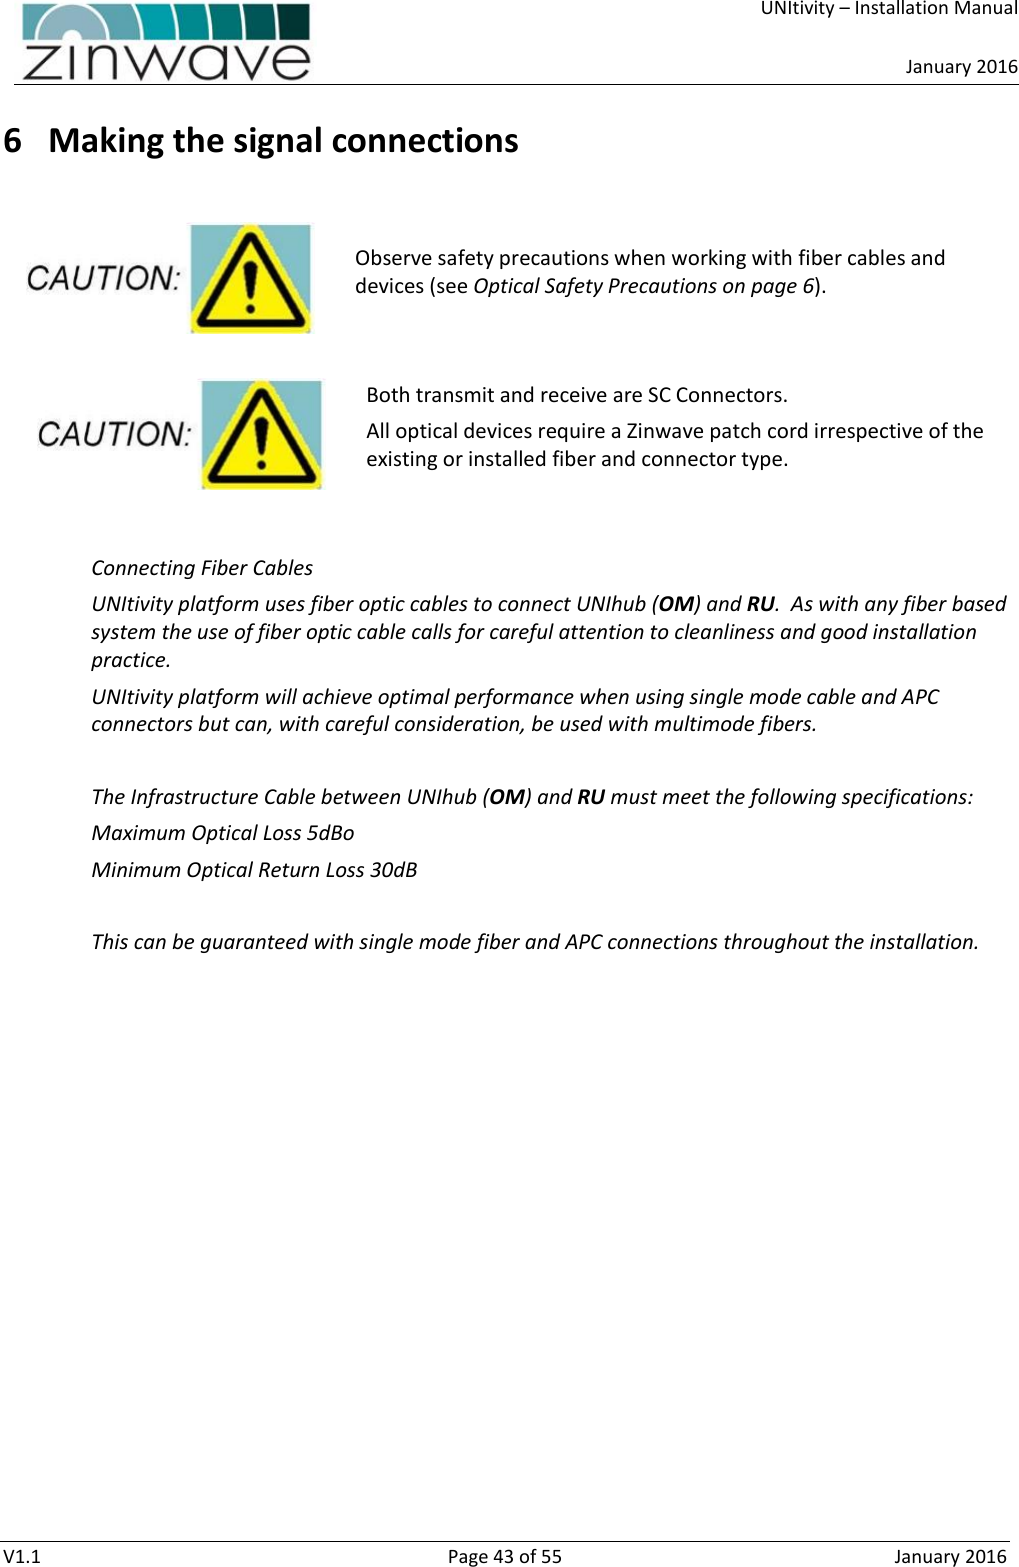     UNItivity – Installation Manual      January 2016  V1.1  Page 43 of 55  January 2016 6 Making the signal connections   Observe safety precautions when working with fiber cables and devices (see Optical Safety Precautions on page 6).   Both transmit and receive are SC Connectors. All optical devices require a Zinwave patch cord irrespective of the existing or installed fiber and connector type.   Connecting Fiber Cables UNItivity platform uses fiber optic cables to connect UNIhub (OM) and RU.  As with any fiber based system the use of fiber optic cable calls for careful attention to cleanliness and good installation practice. UNItivity platform will achieve optimal performance when using single mode cable and APC connectors but can, with careful consideration, be used with multimode fibers.   The Infrastructure Cable between UNIhub (OM) and RU must meet the following specifications: Maximum Optical Loss 5dBo Minimum Optical Return Loss 30dB  This can be guaranteed with single mode fiber and APC connections throughout the installation.    